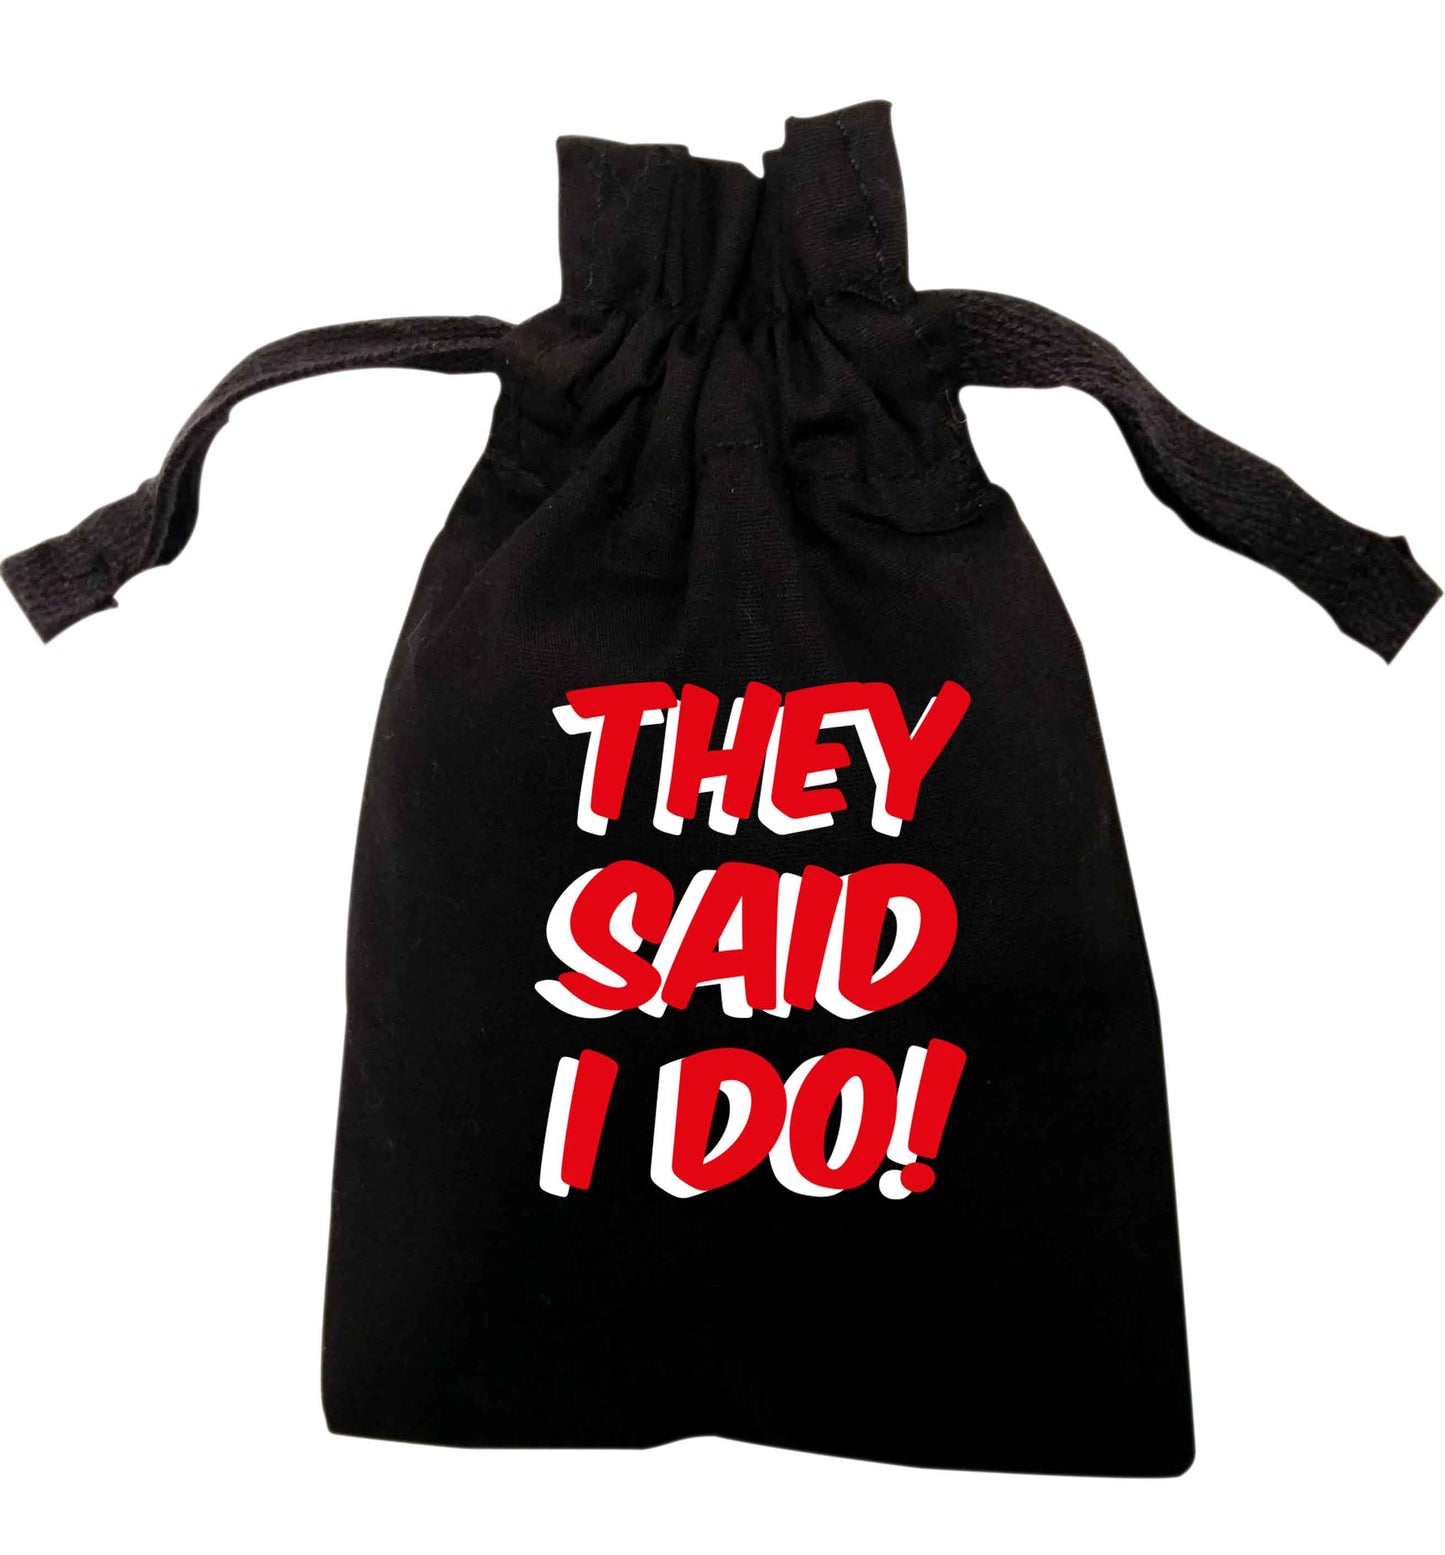 They said I do | XS - L | Pouch / Drawstring bag / Sack | Organic Cotton | Bulk discounts available!